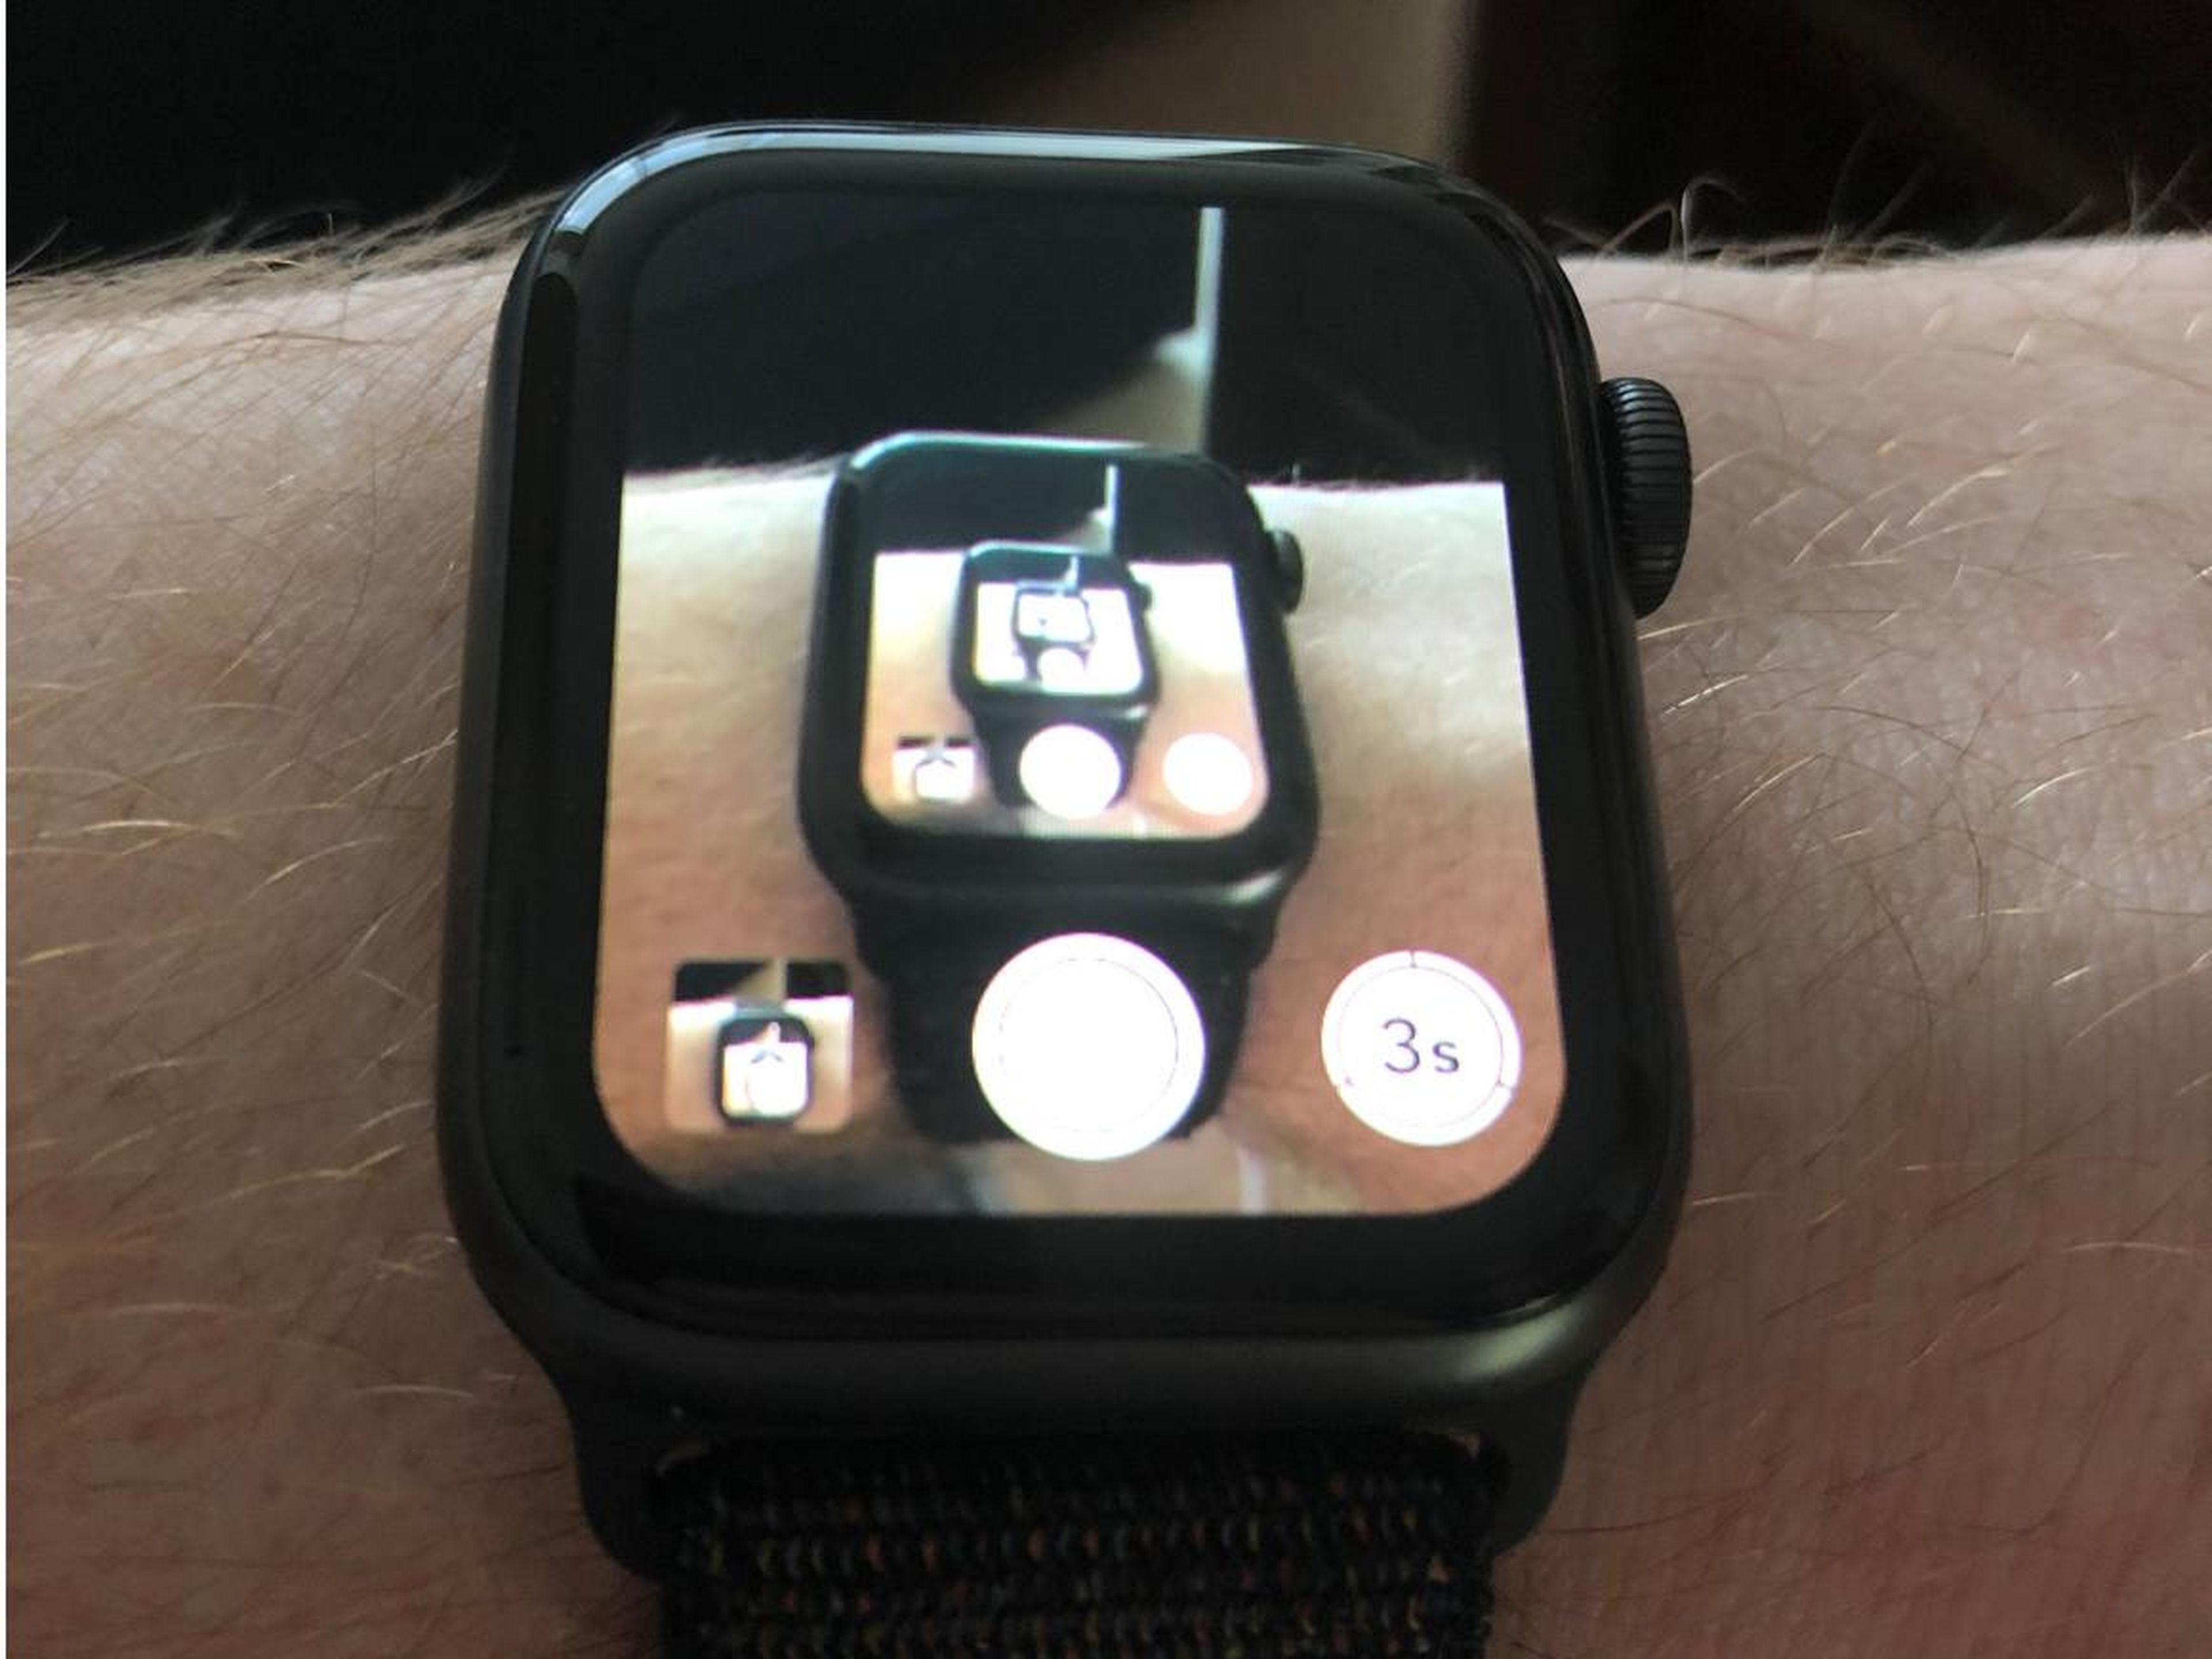 6. Your Apple Watch can take pictures for you.